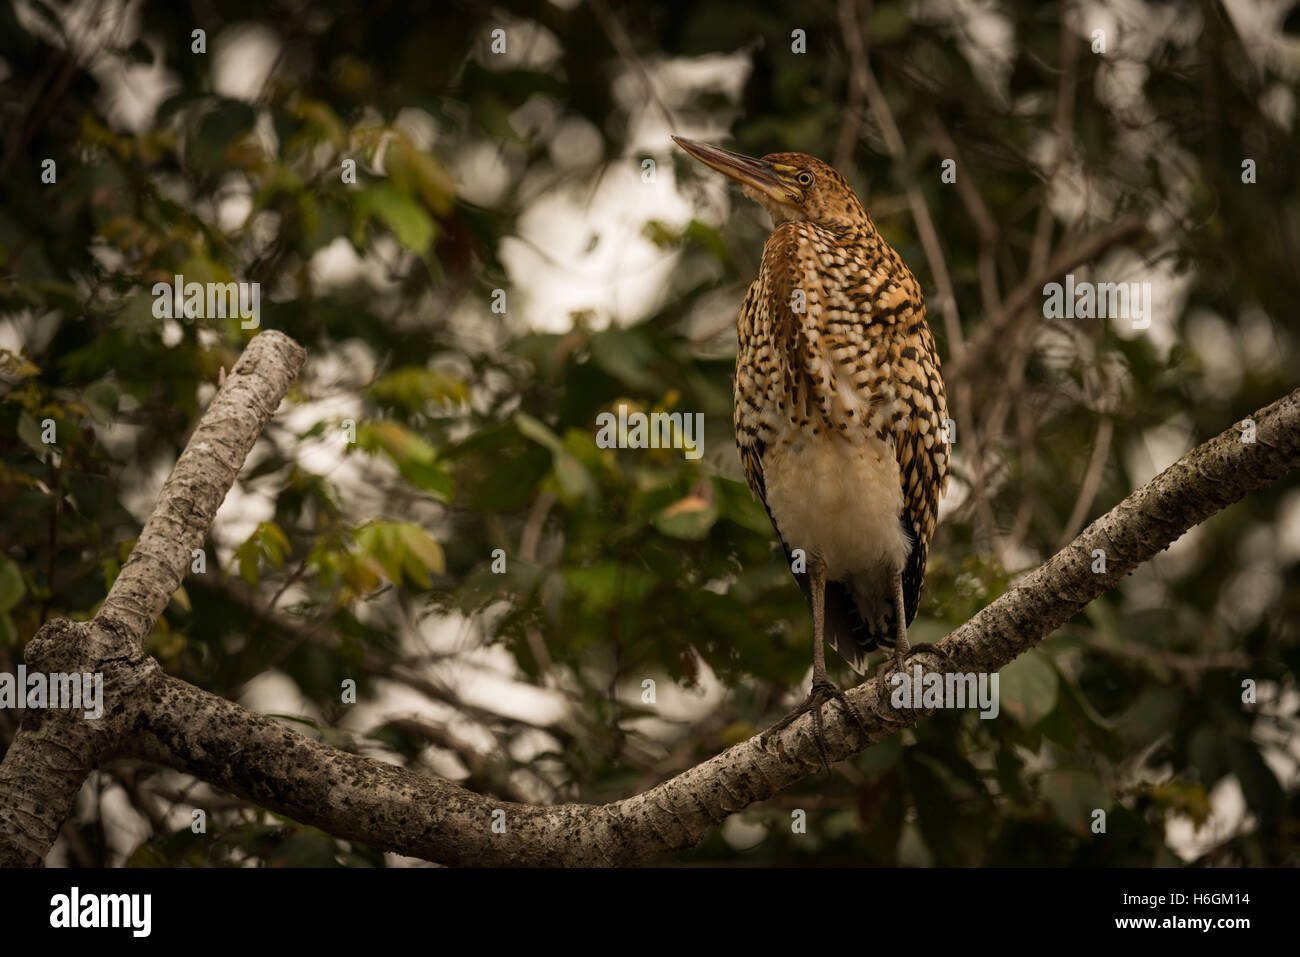 Rufescent tiger heron on branch looking up Stock Photo